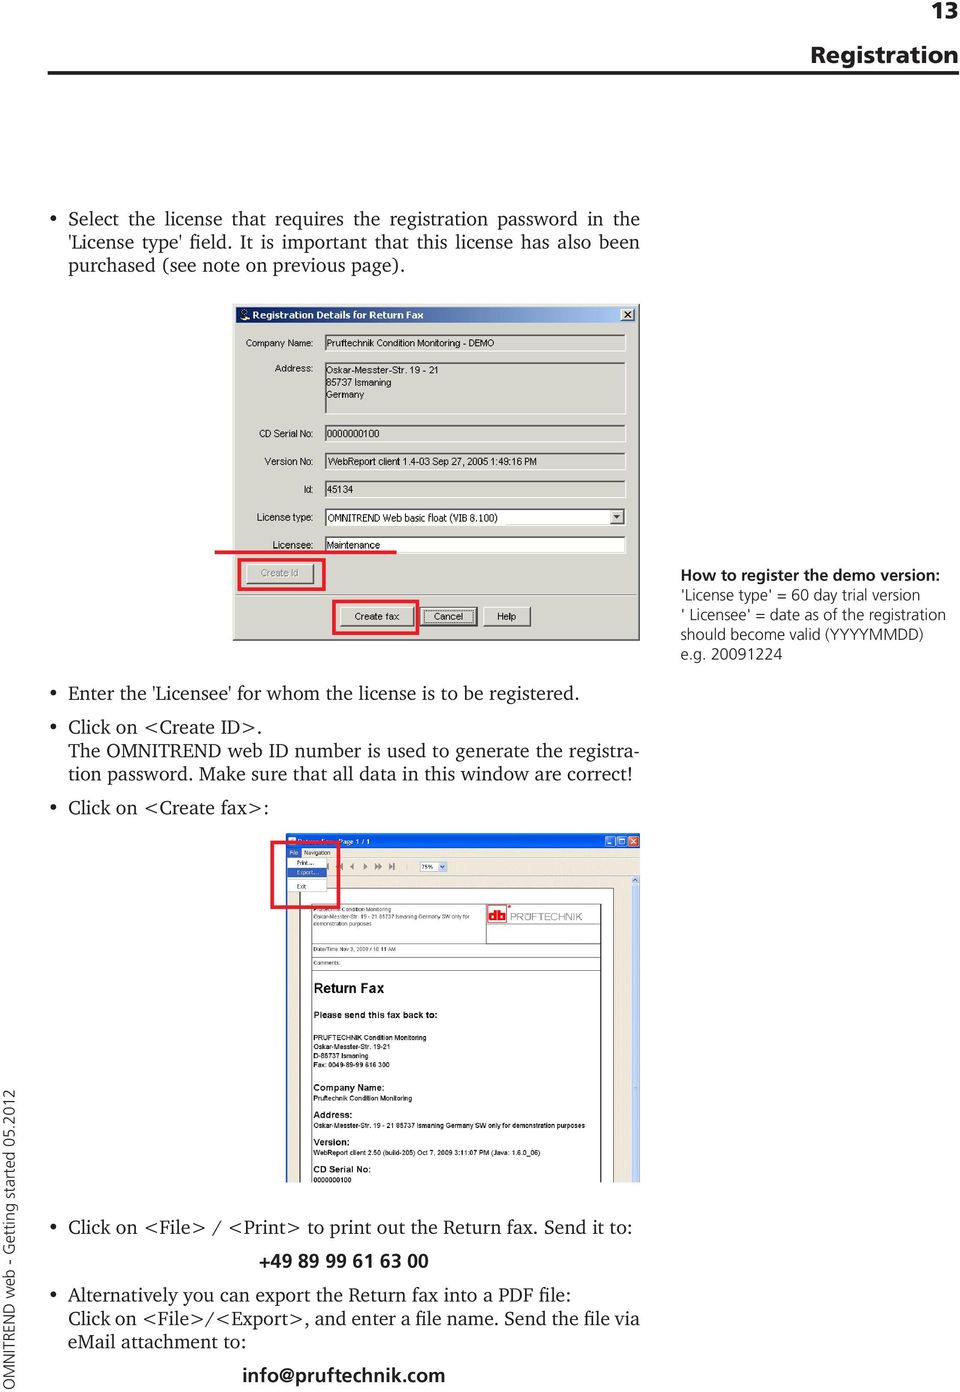 Click on <Create ID>. The OMNITREND web ID number is used to generate the registration password. Make sure that all data in this window are correct!